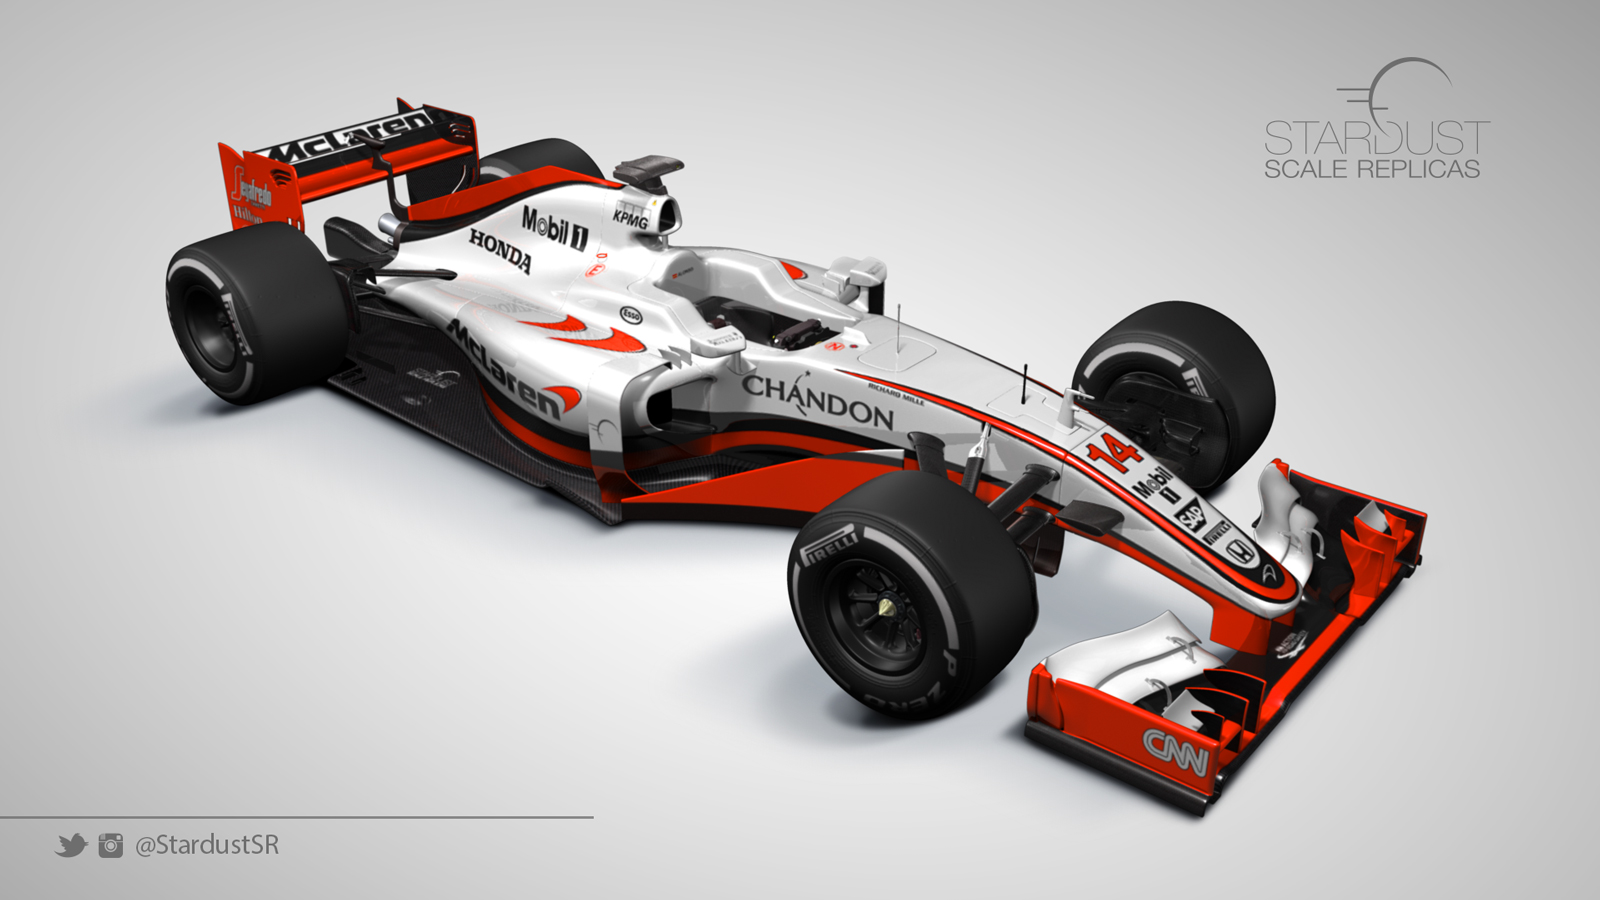 These Redesigned F1 Liveries Would Bring More Colour To